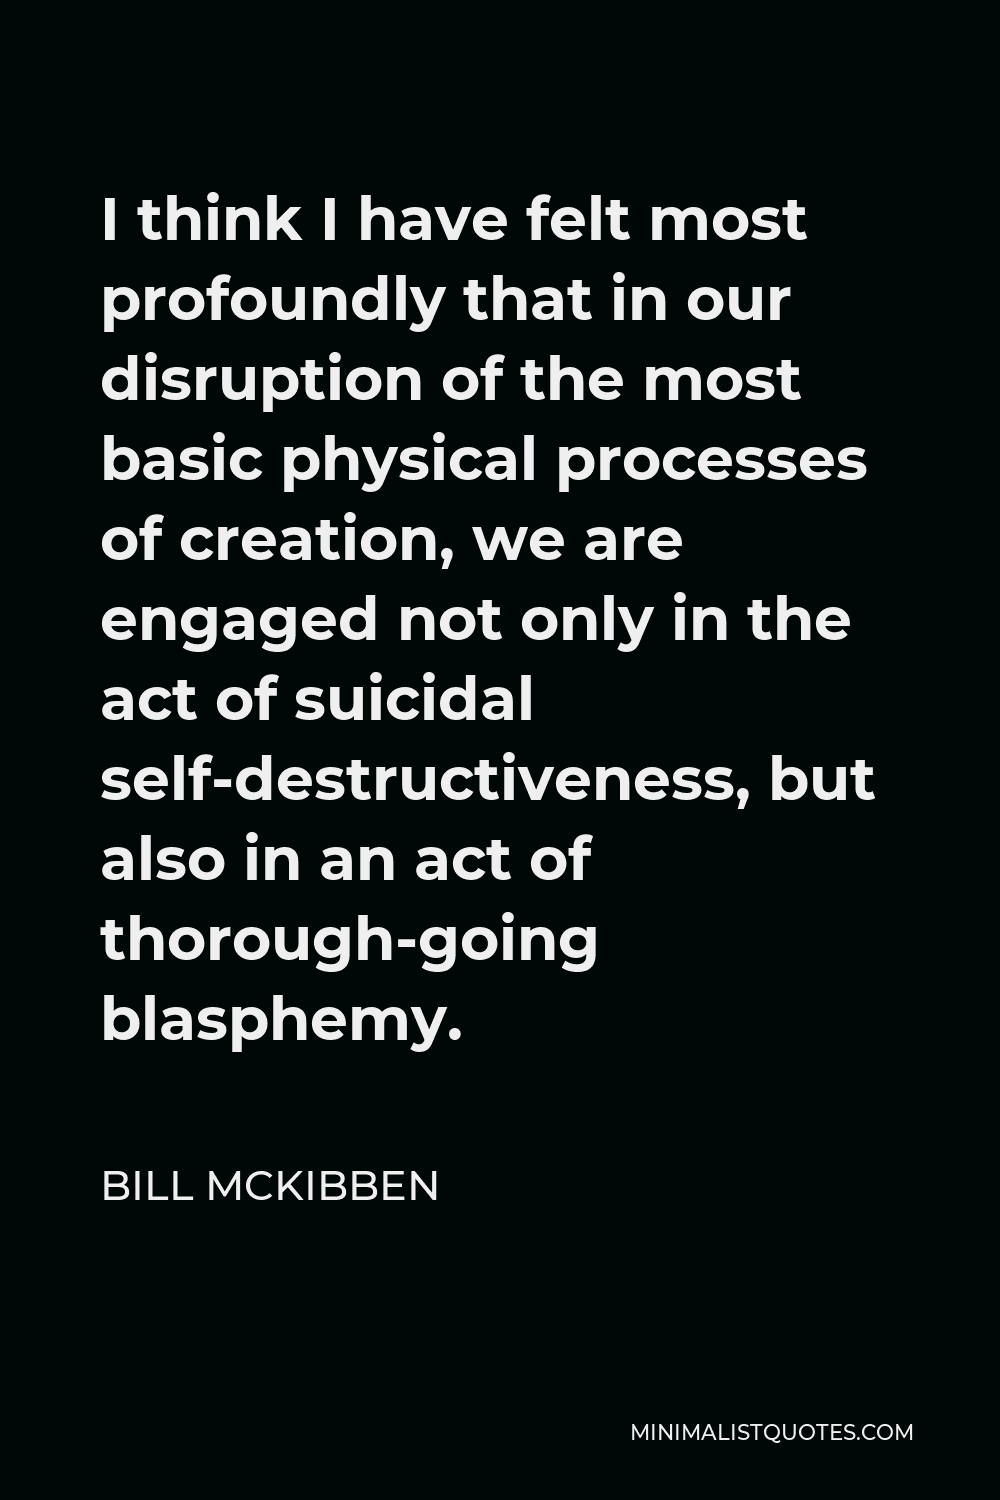 Bill McKibben Quote - I think I have felt most profoundly that in our disruption of the most basic physical processes of creation, we are engaged not only in the act of suicidal self-destructiveness, but also in an act of thorough-going blasphemy.